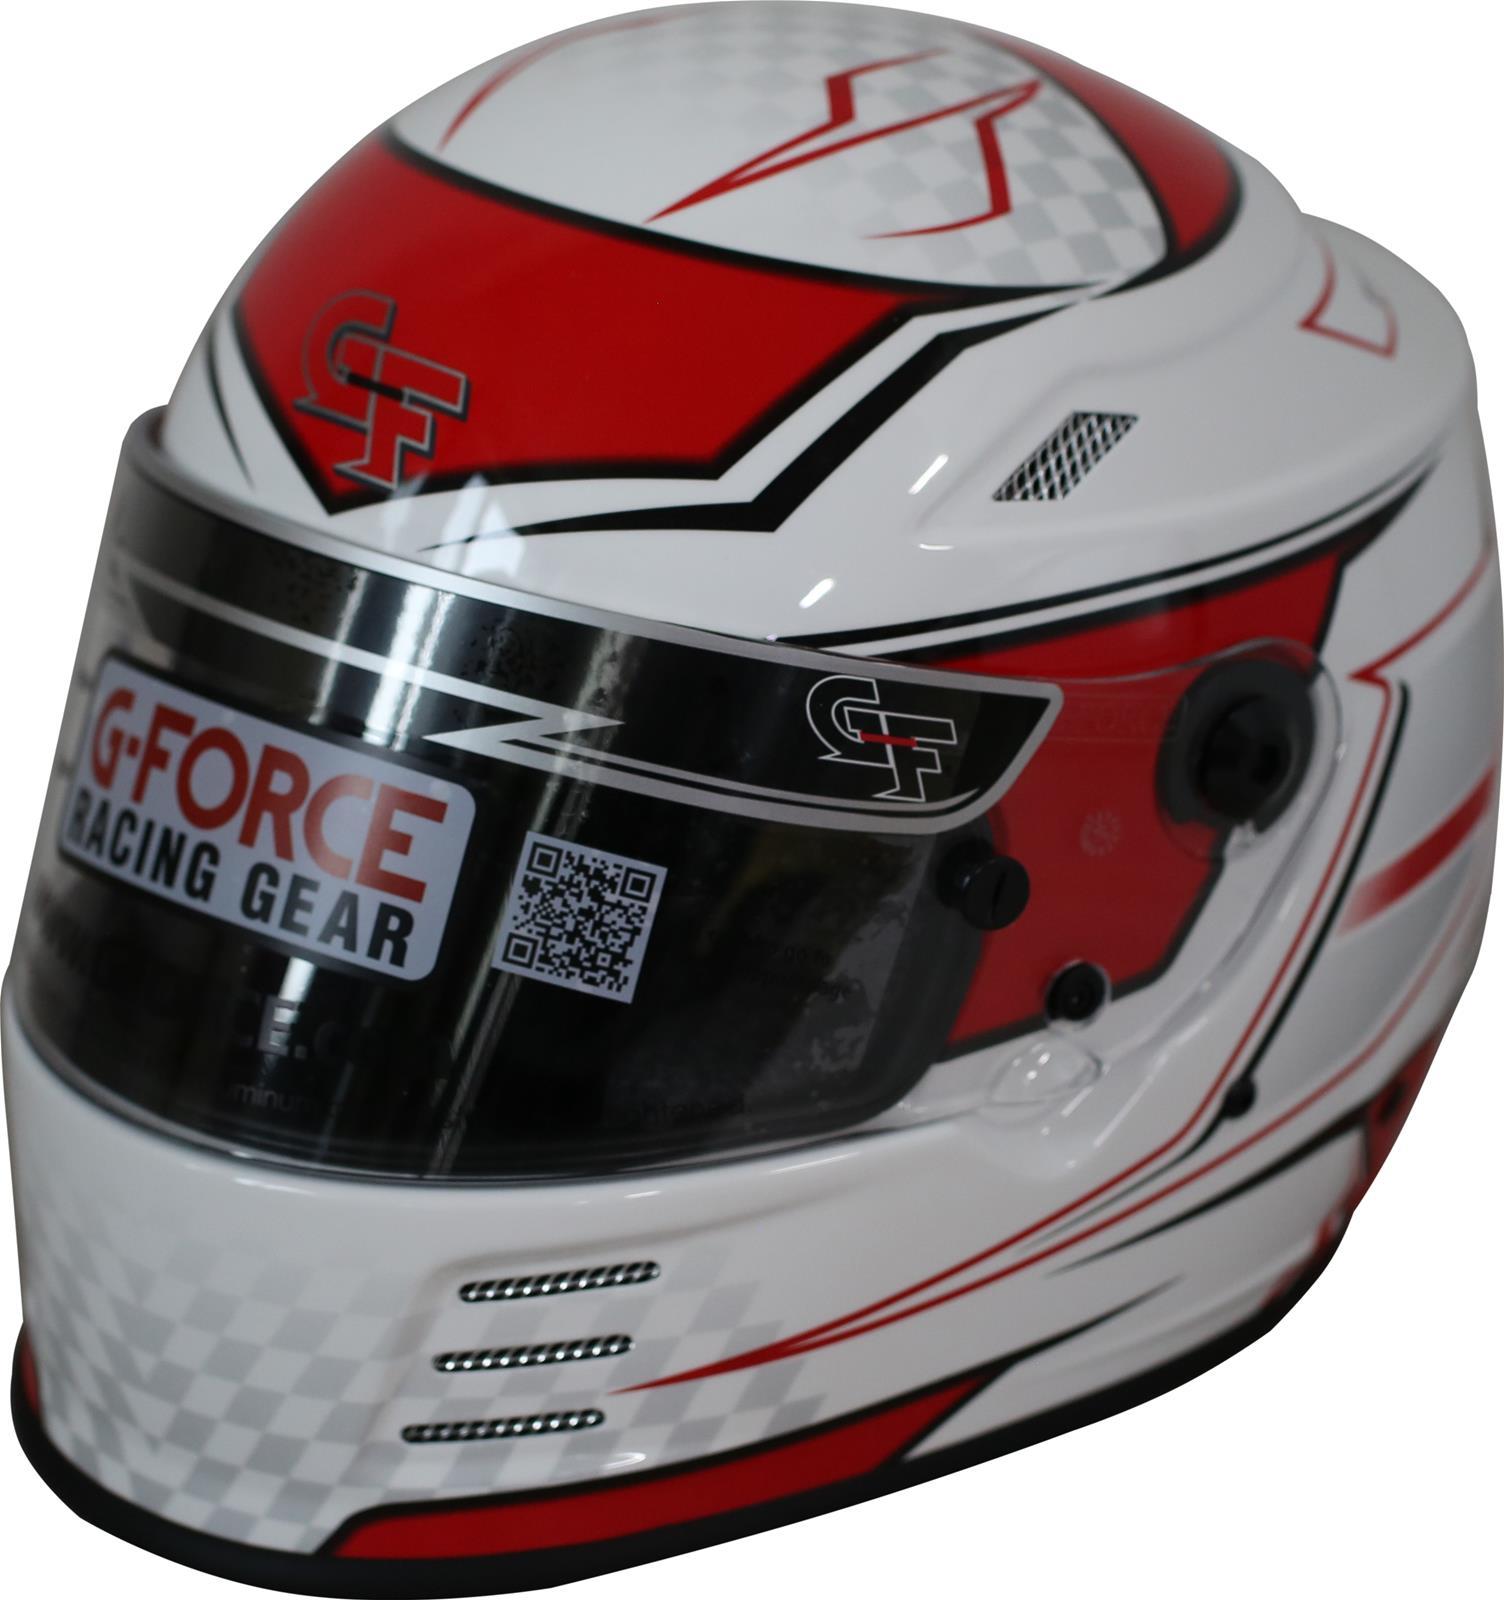 G-Force HELMET REVO GRAPHICS SML RED SA2020 Helmets and Accessories Helmets main image